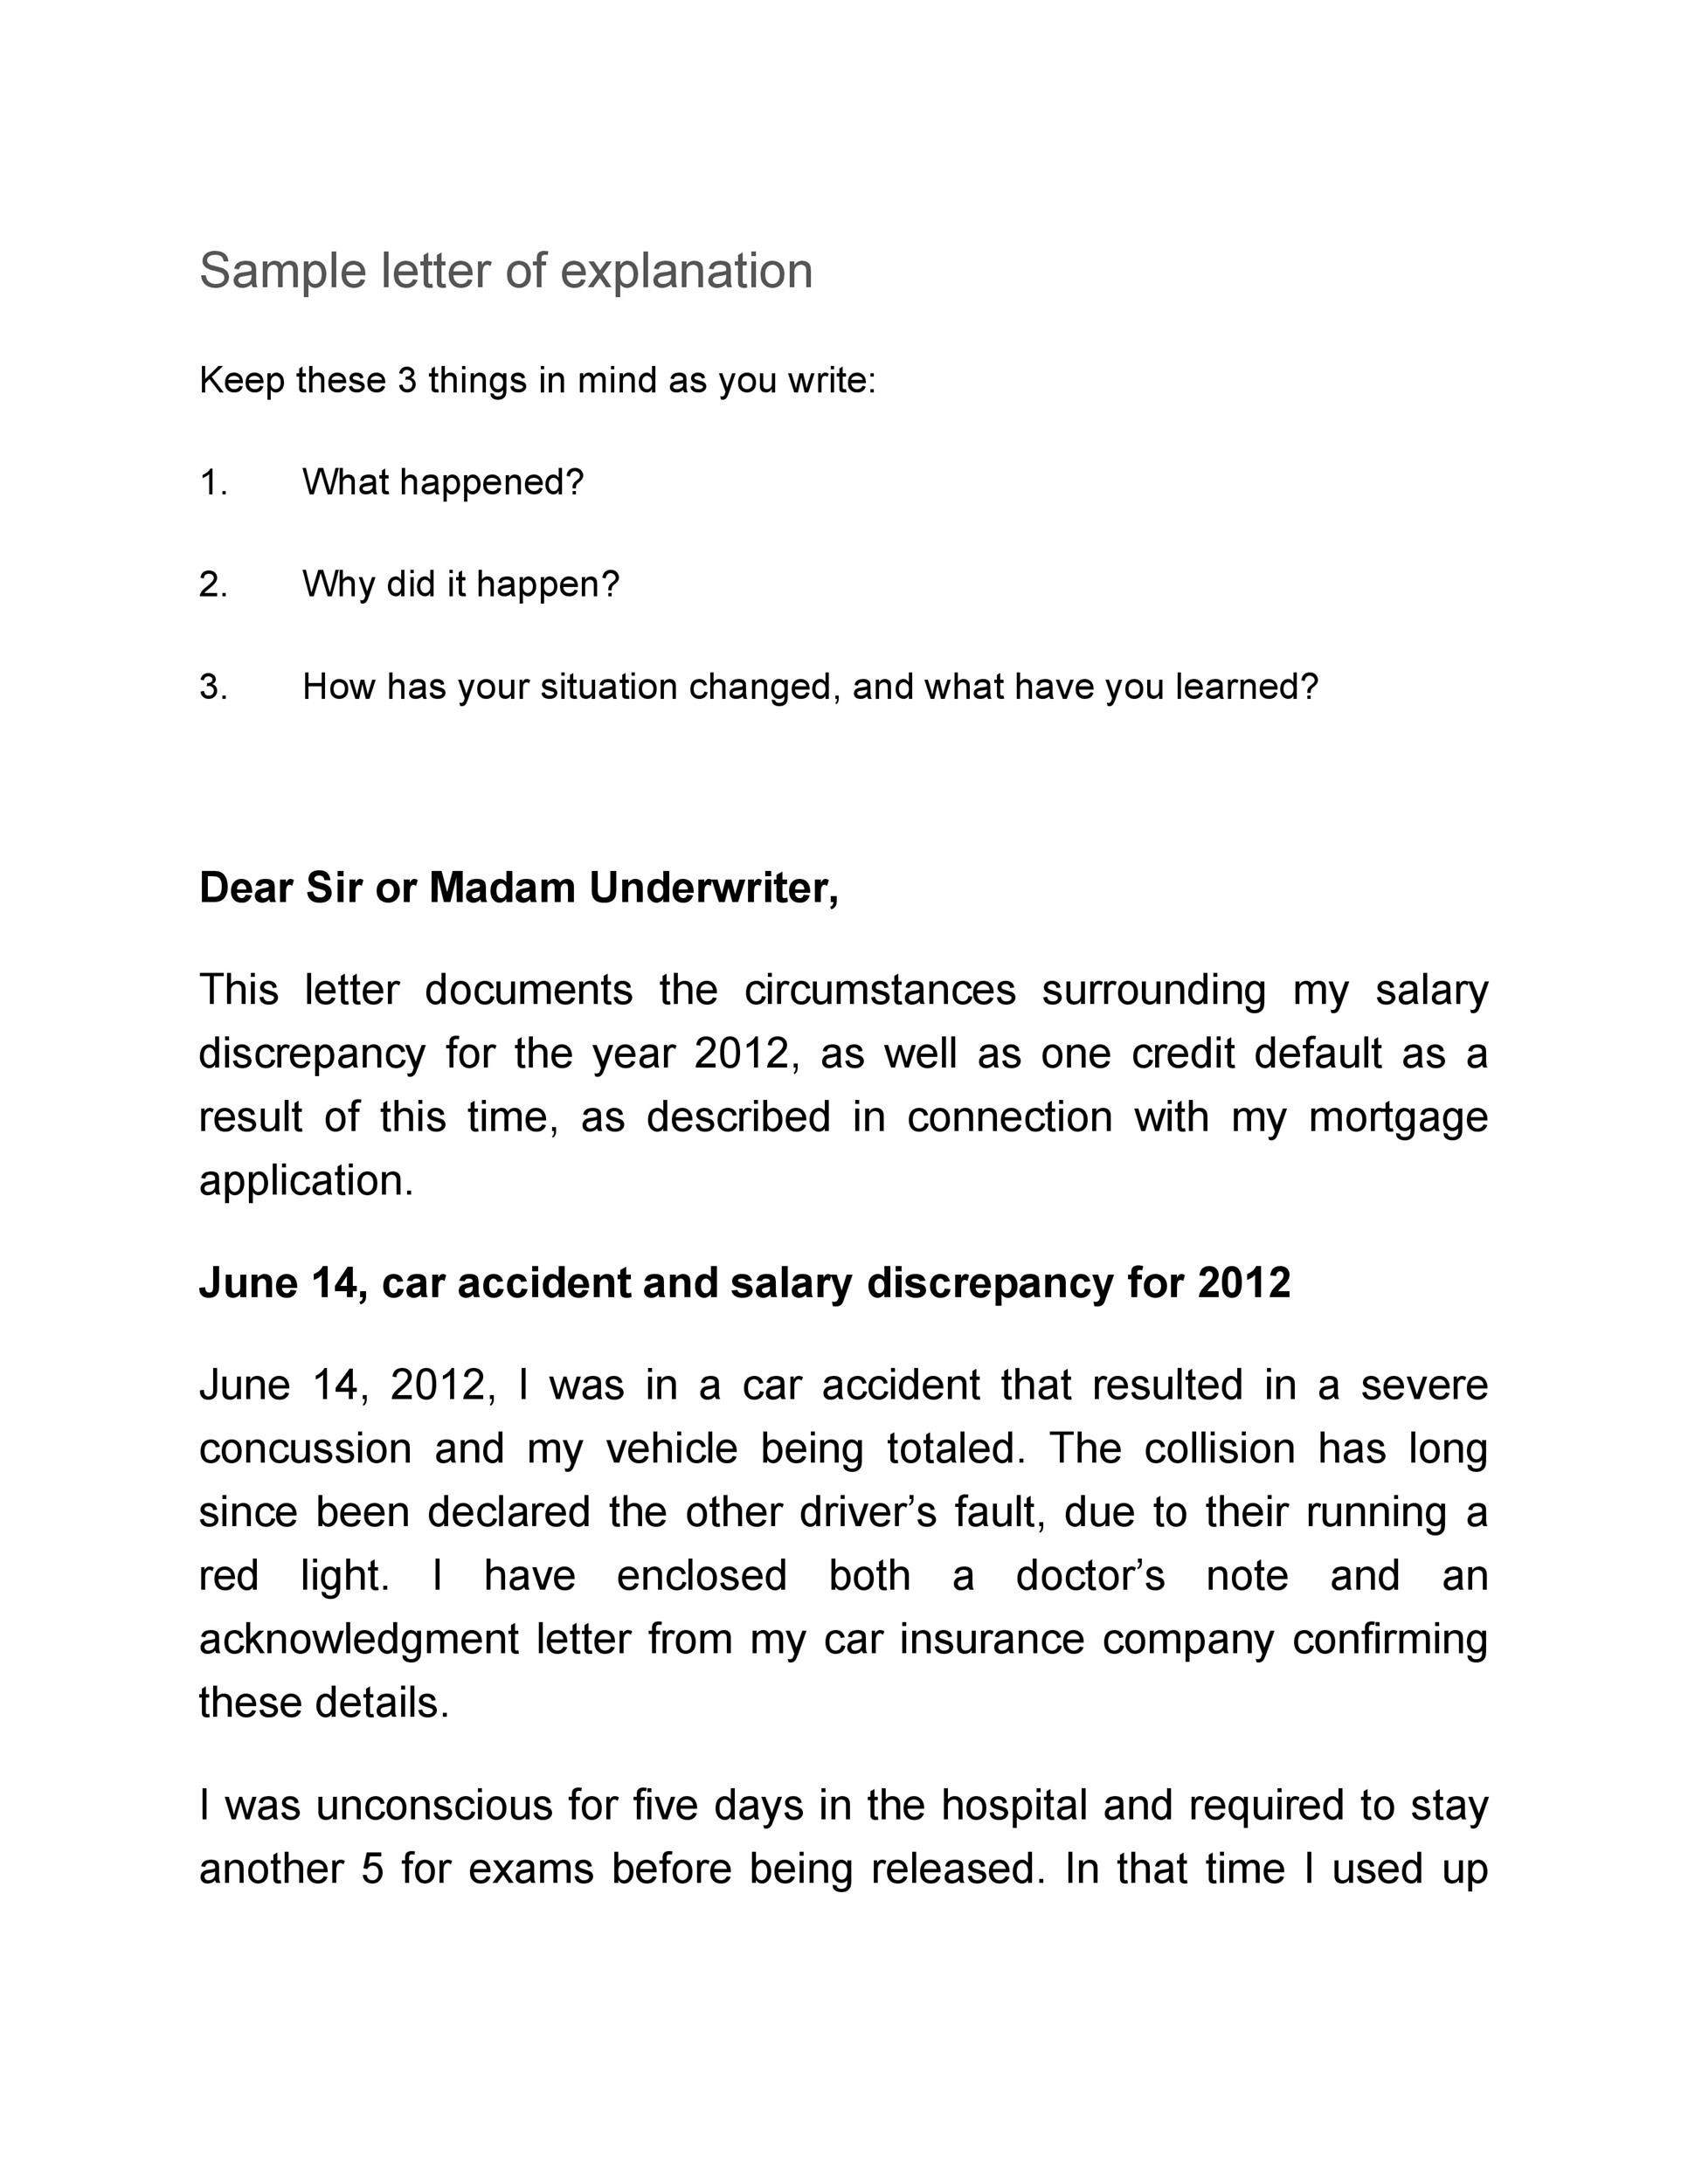 Letter Of Explanation Sample To Underwriter from templatelab.com